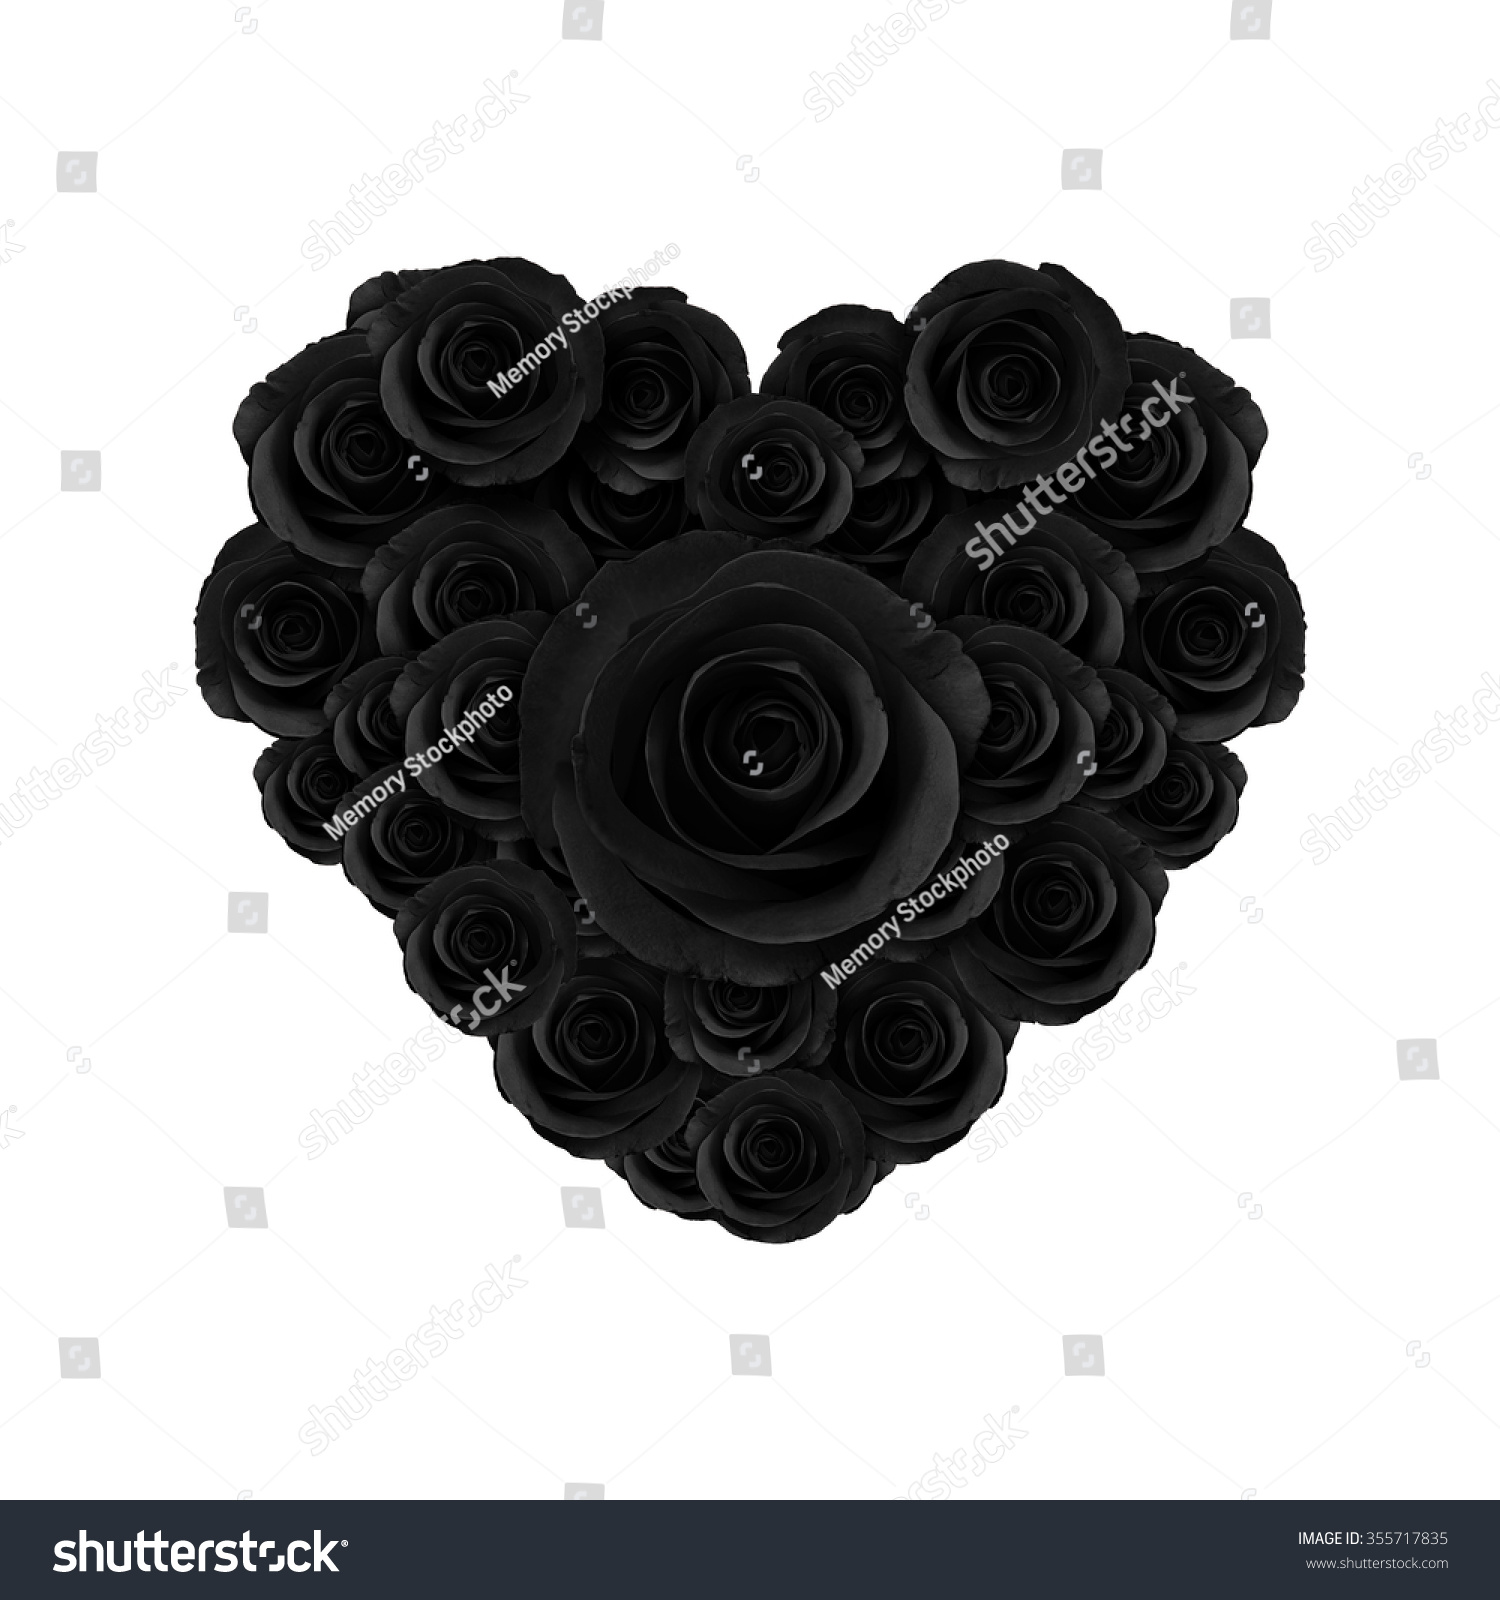 Black Roses And Hearts